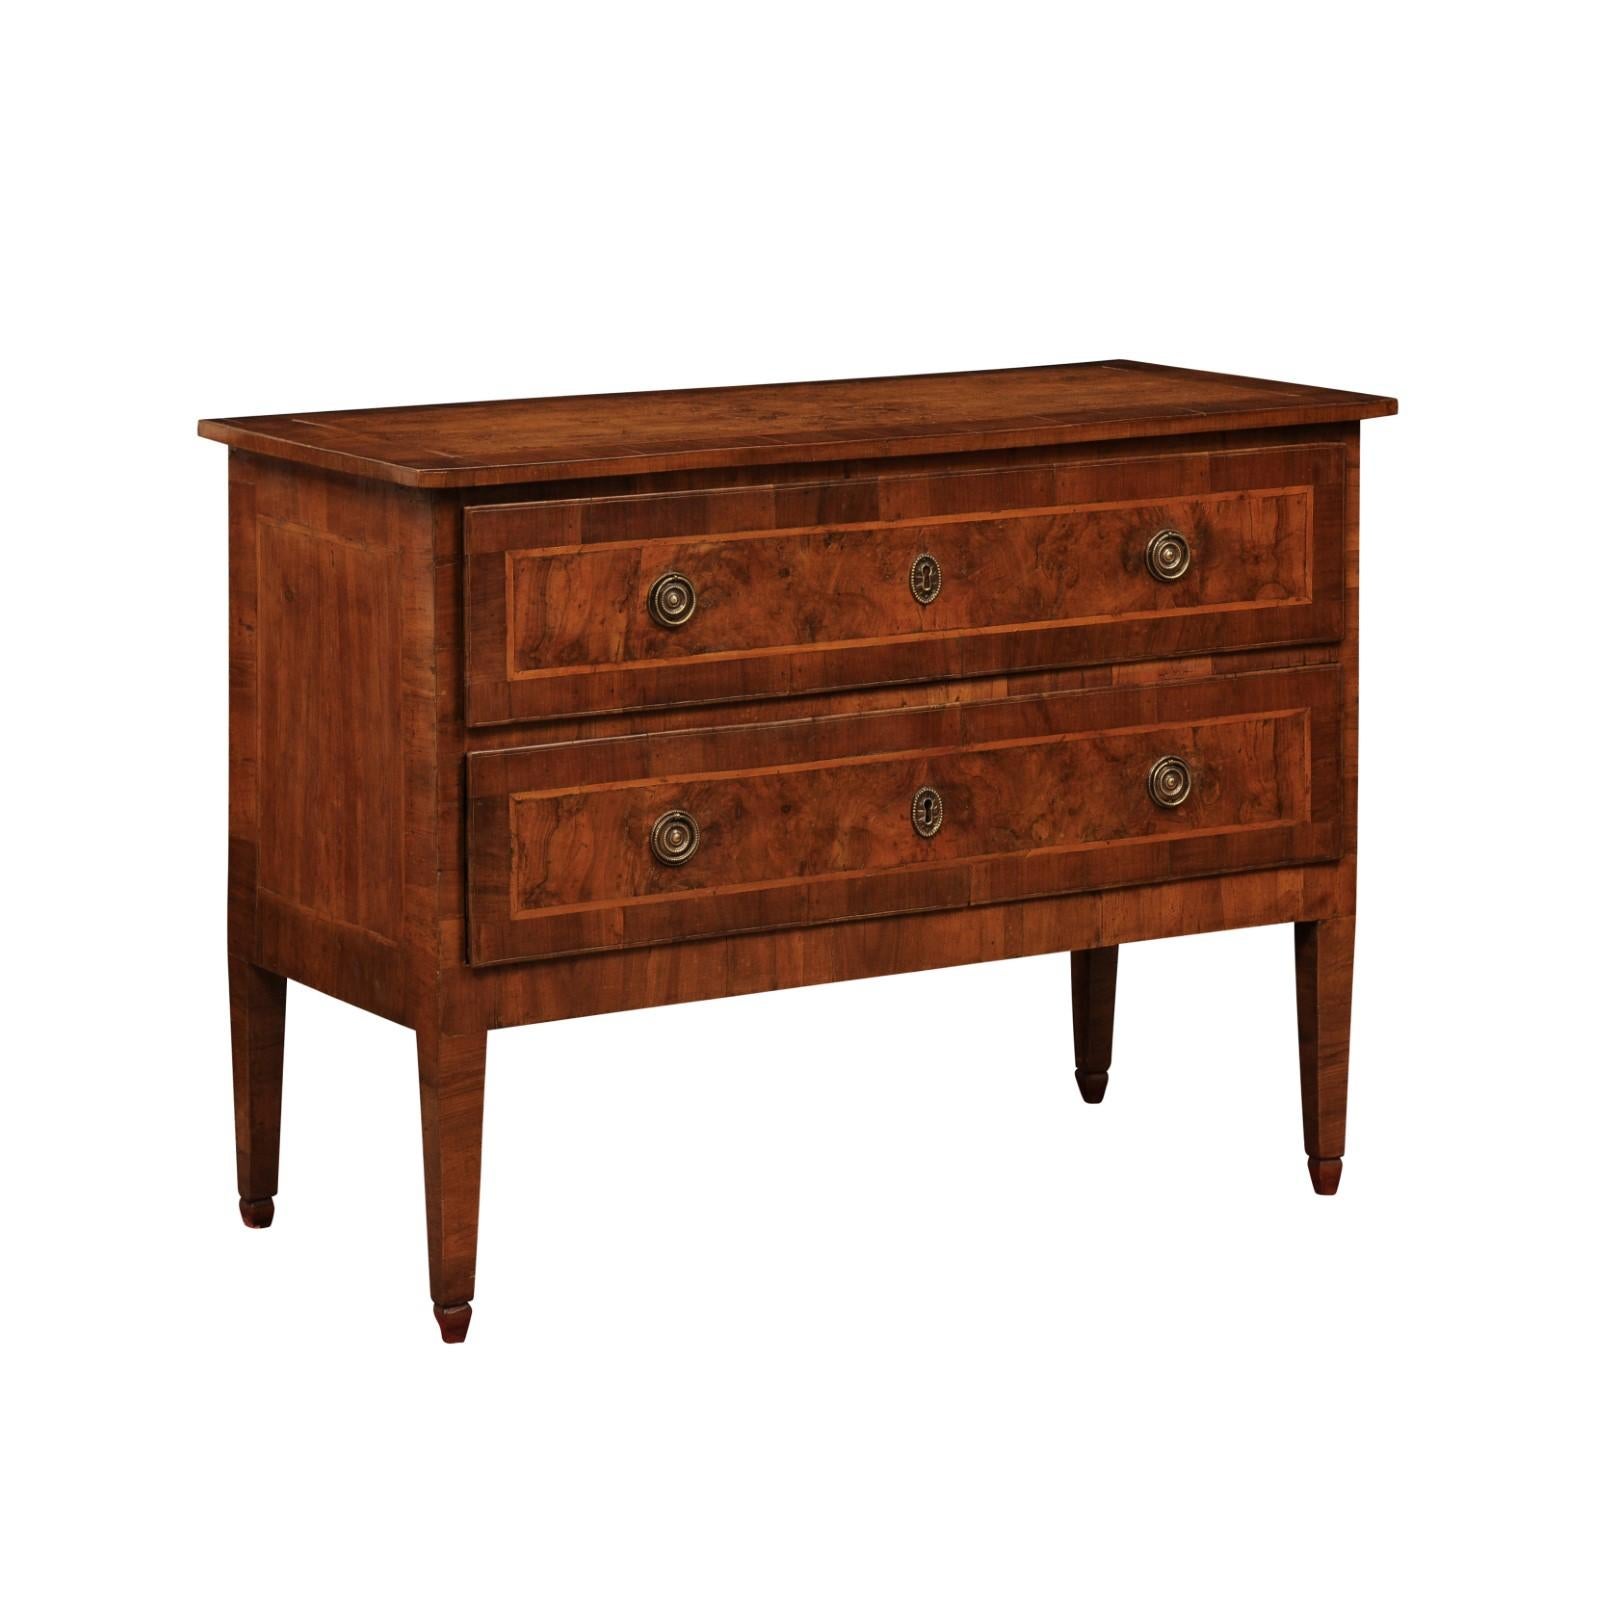 Late 18th Century Italian Walnut 2 Drawer Commode with Inlay, ca. 1790 In Good Condition For Sale In Atlanta, GA